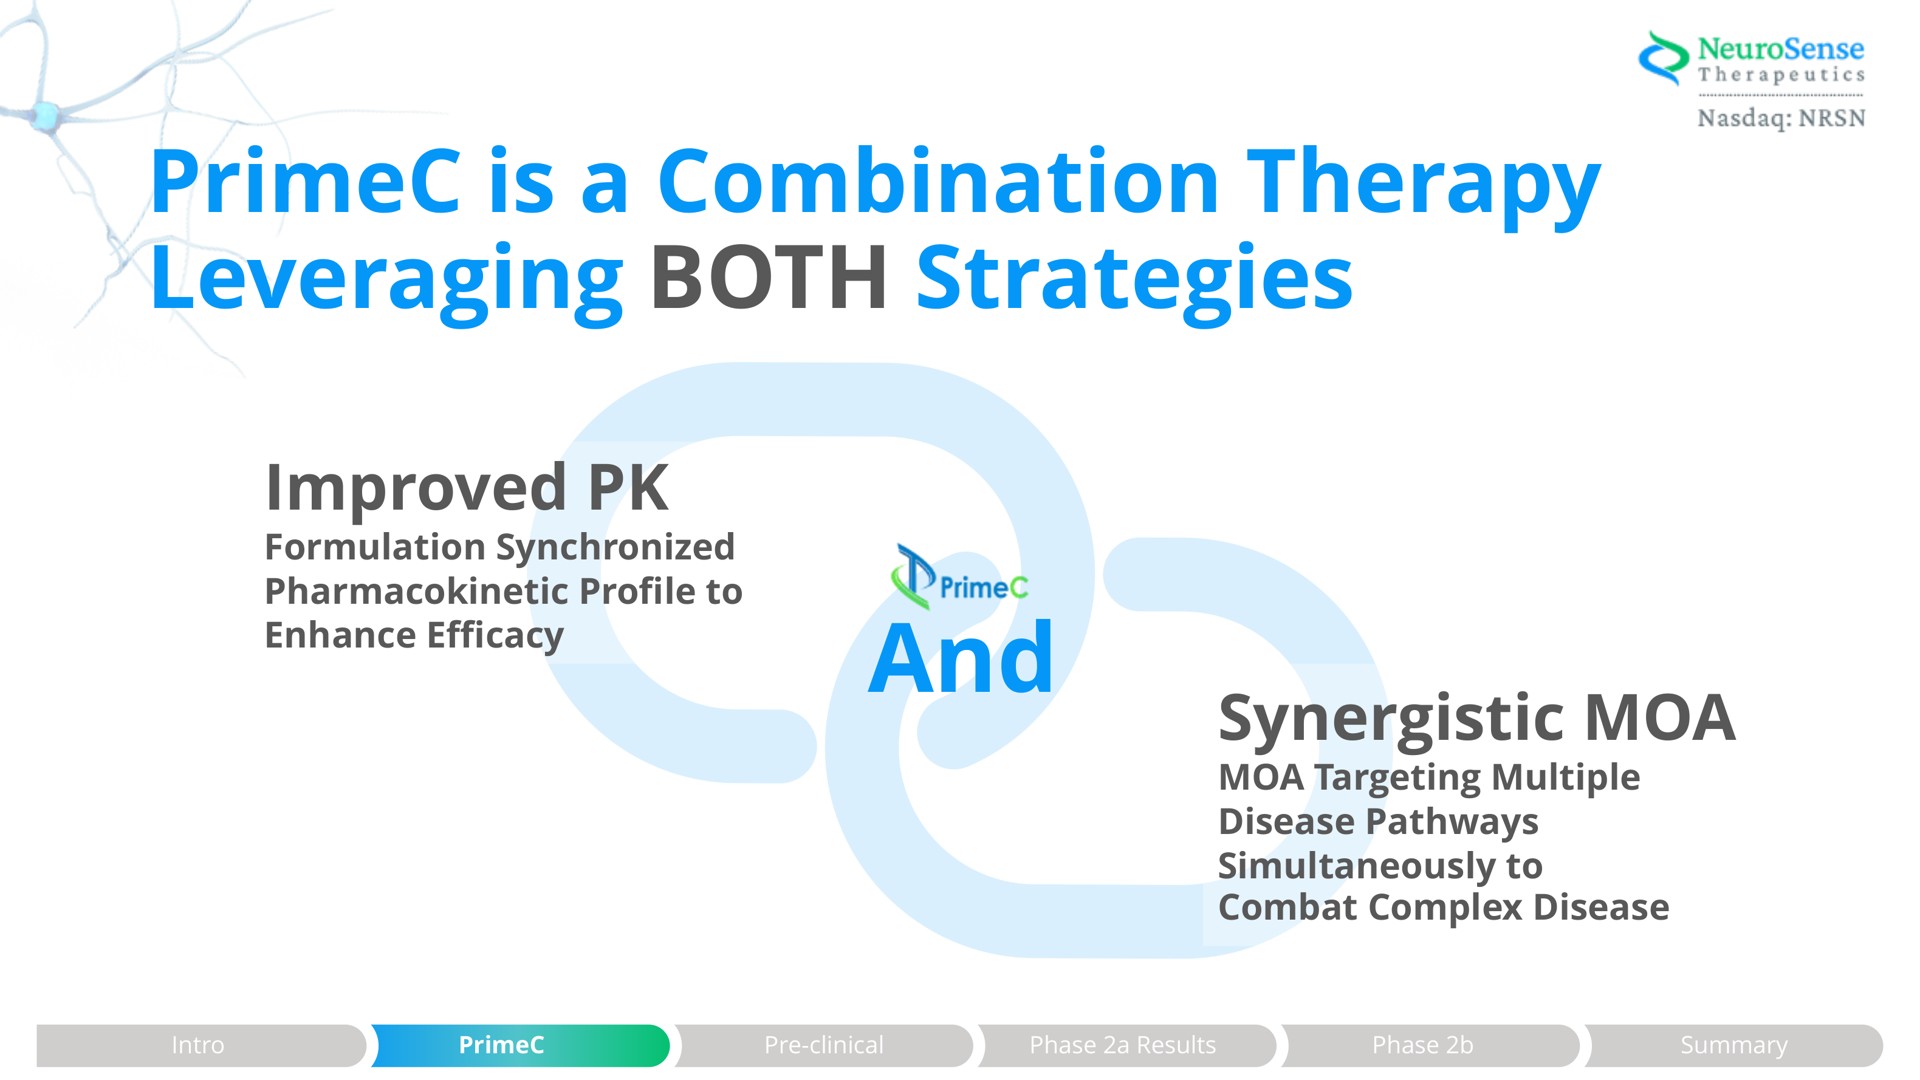 is a combination therapy leveraging both strategies improved and synergistic | NeuroSense Therapeutics